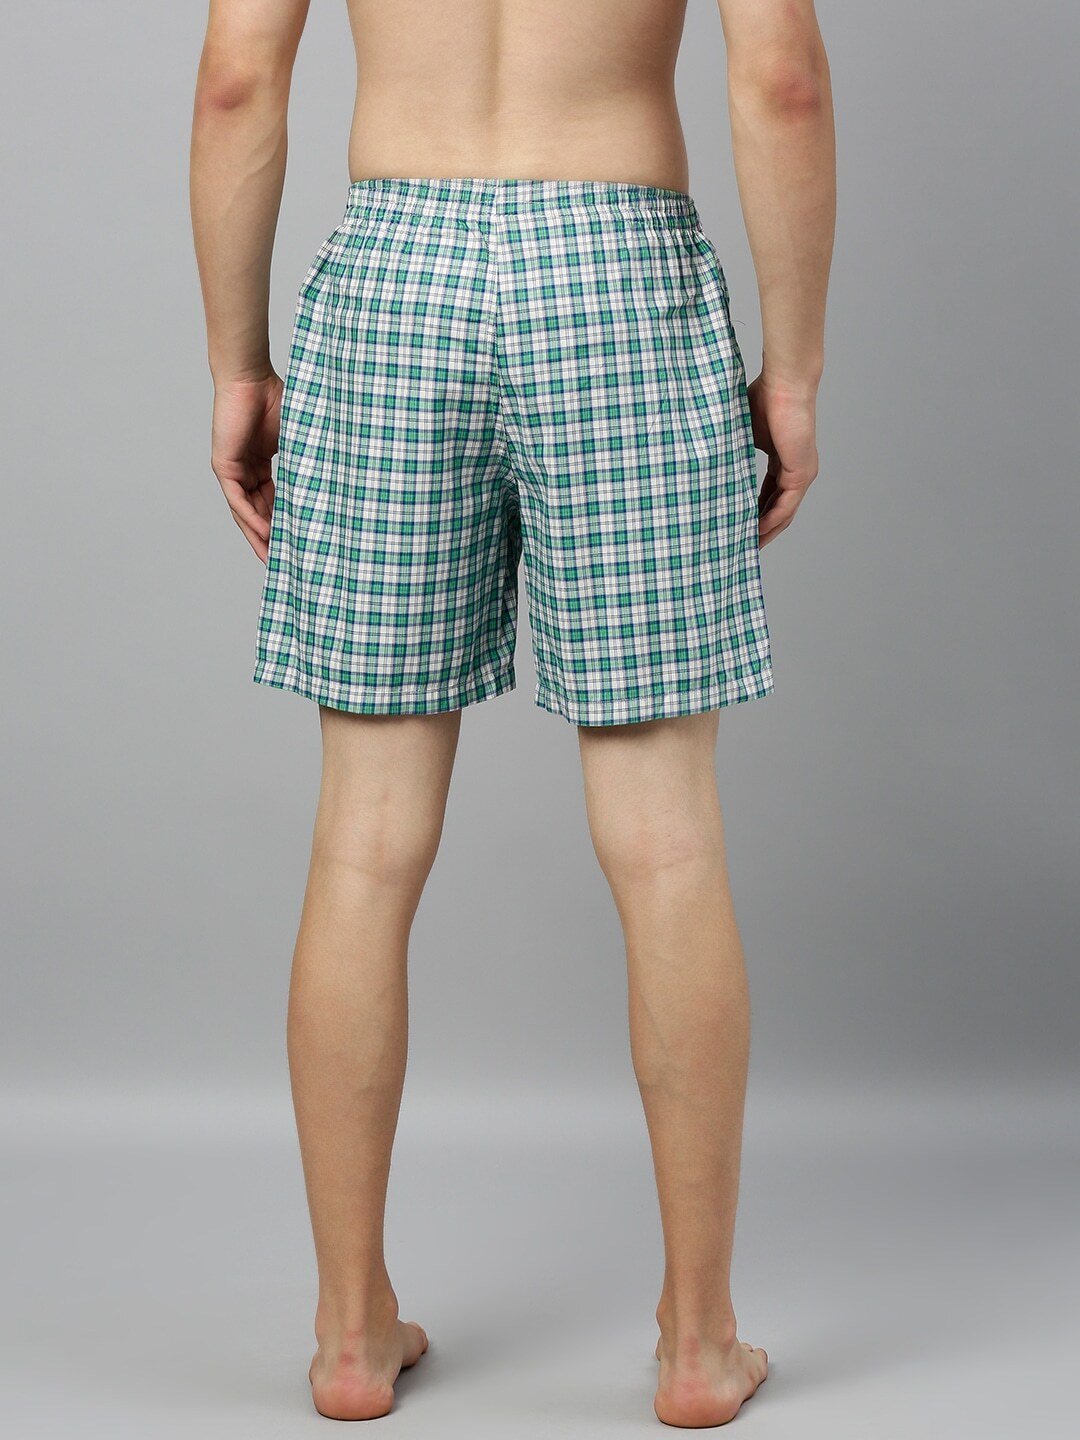 Men Navy Green & White Checked Boxers STYLE-024A MARSHMALLOW/ISLAND GREEN-300 ls-024